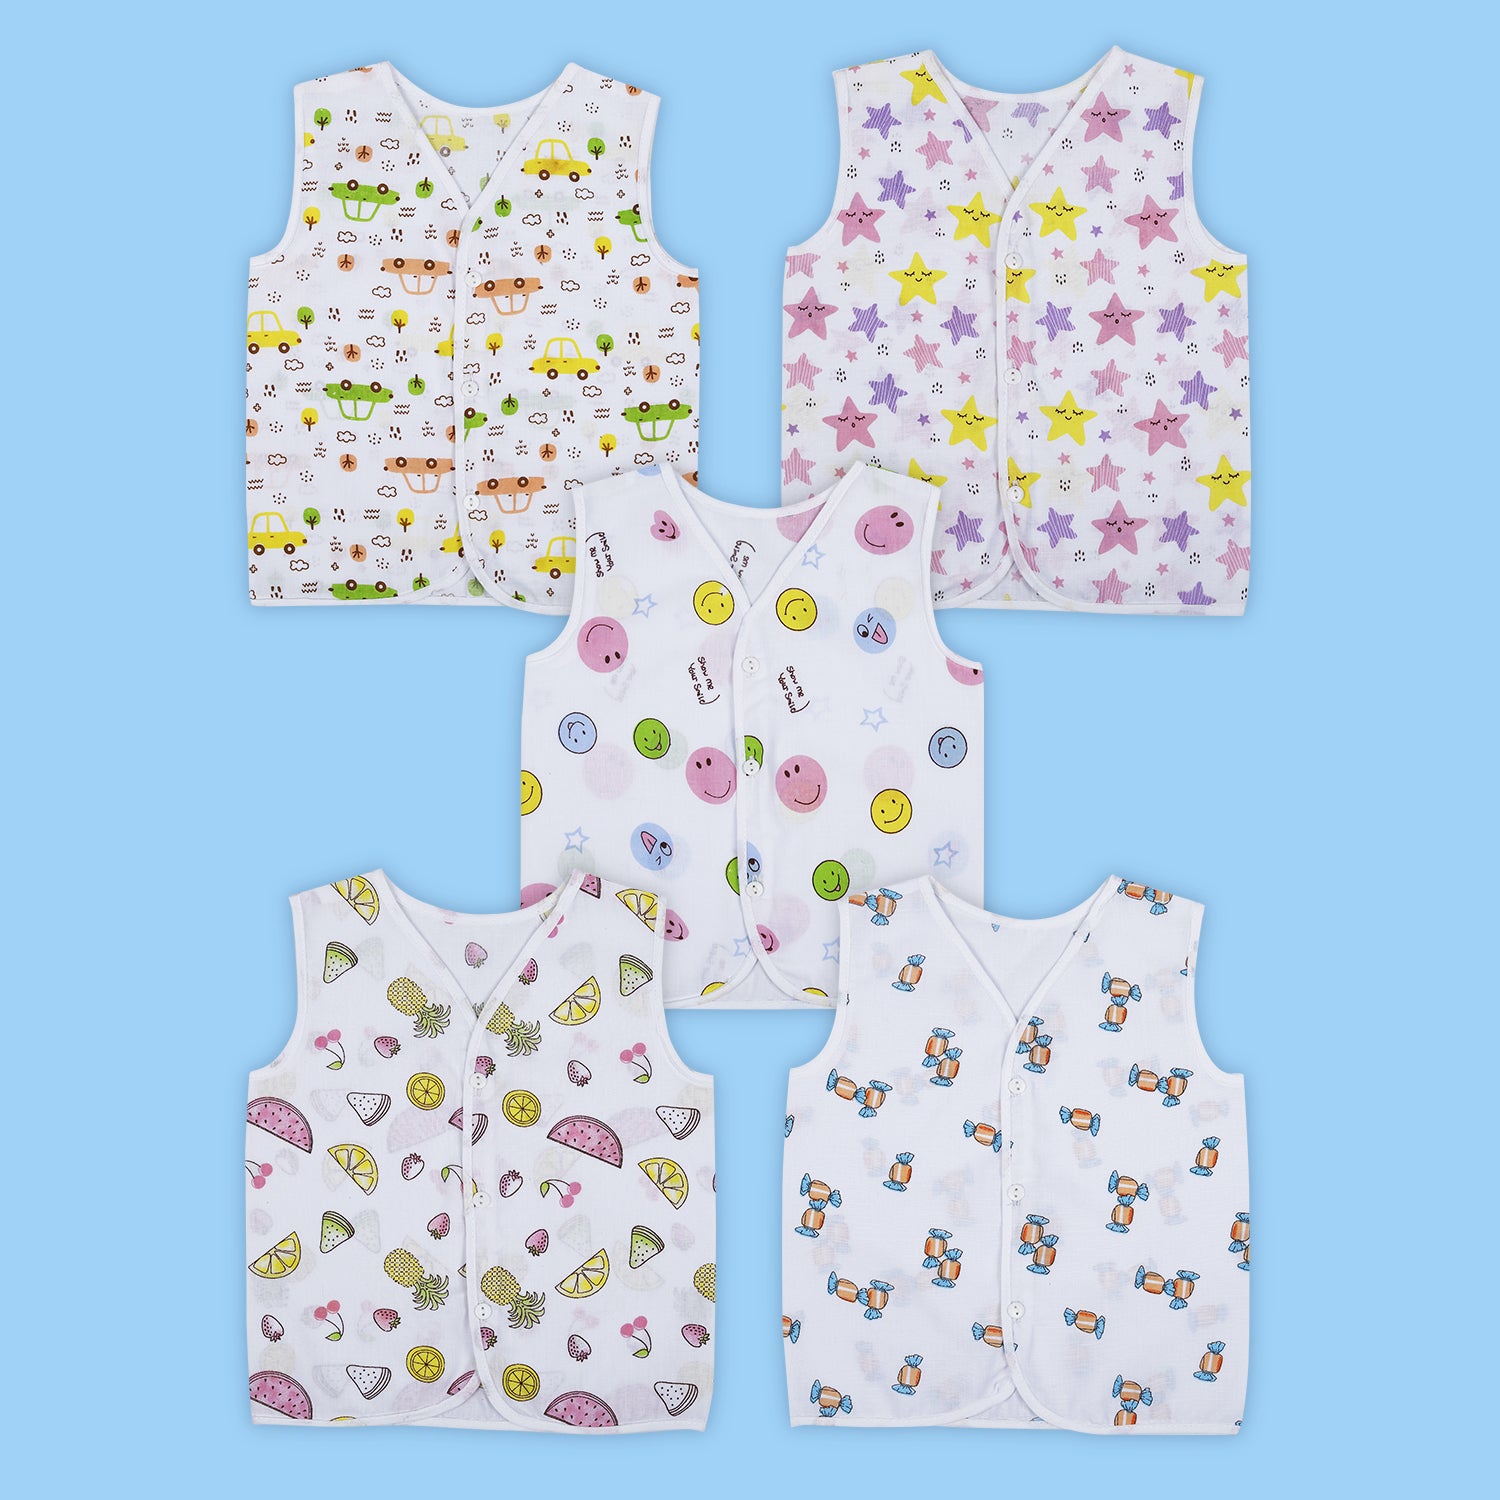 Baby Moo Smiling Stars Printed V-Neck Sleeveless Front Opening Button Cotton Jhablas 5 Pcs - Yellow, Multicolour